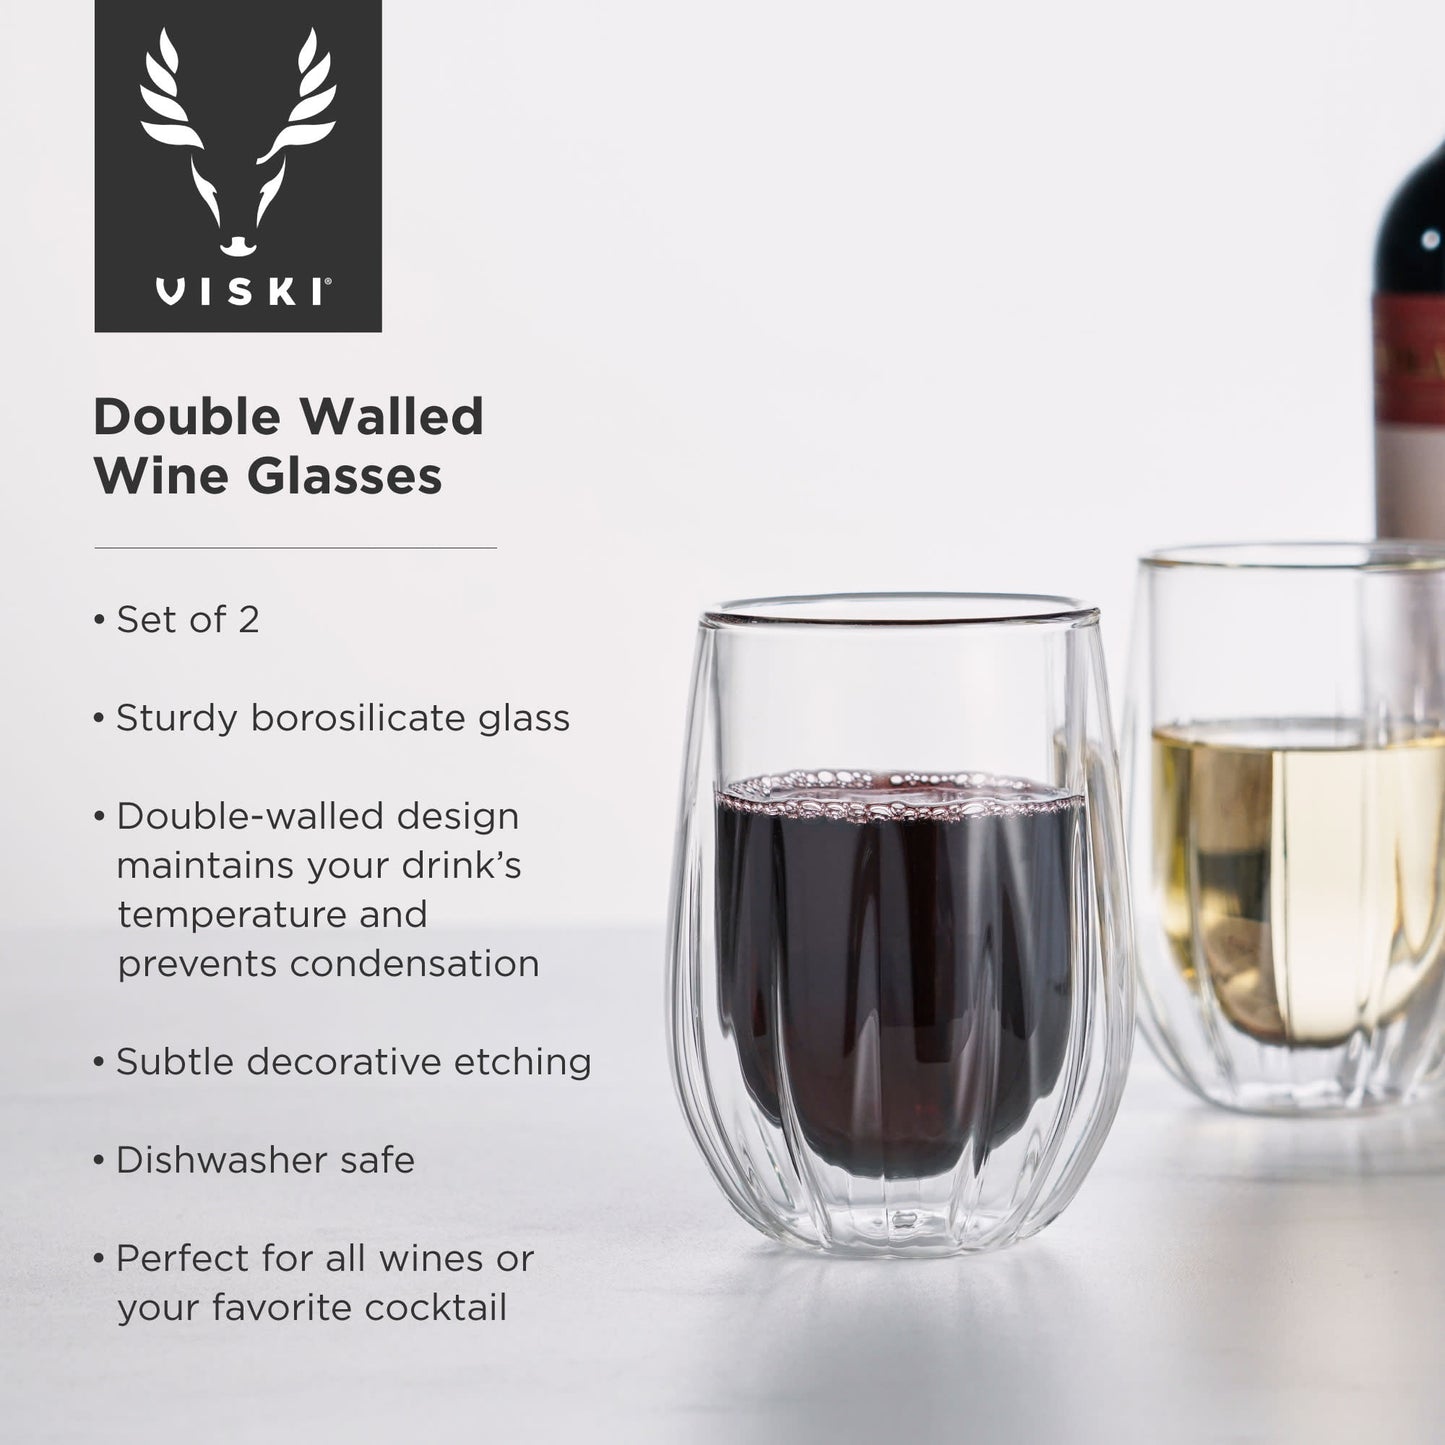 Double Walled Wine Glasses